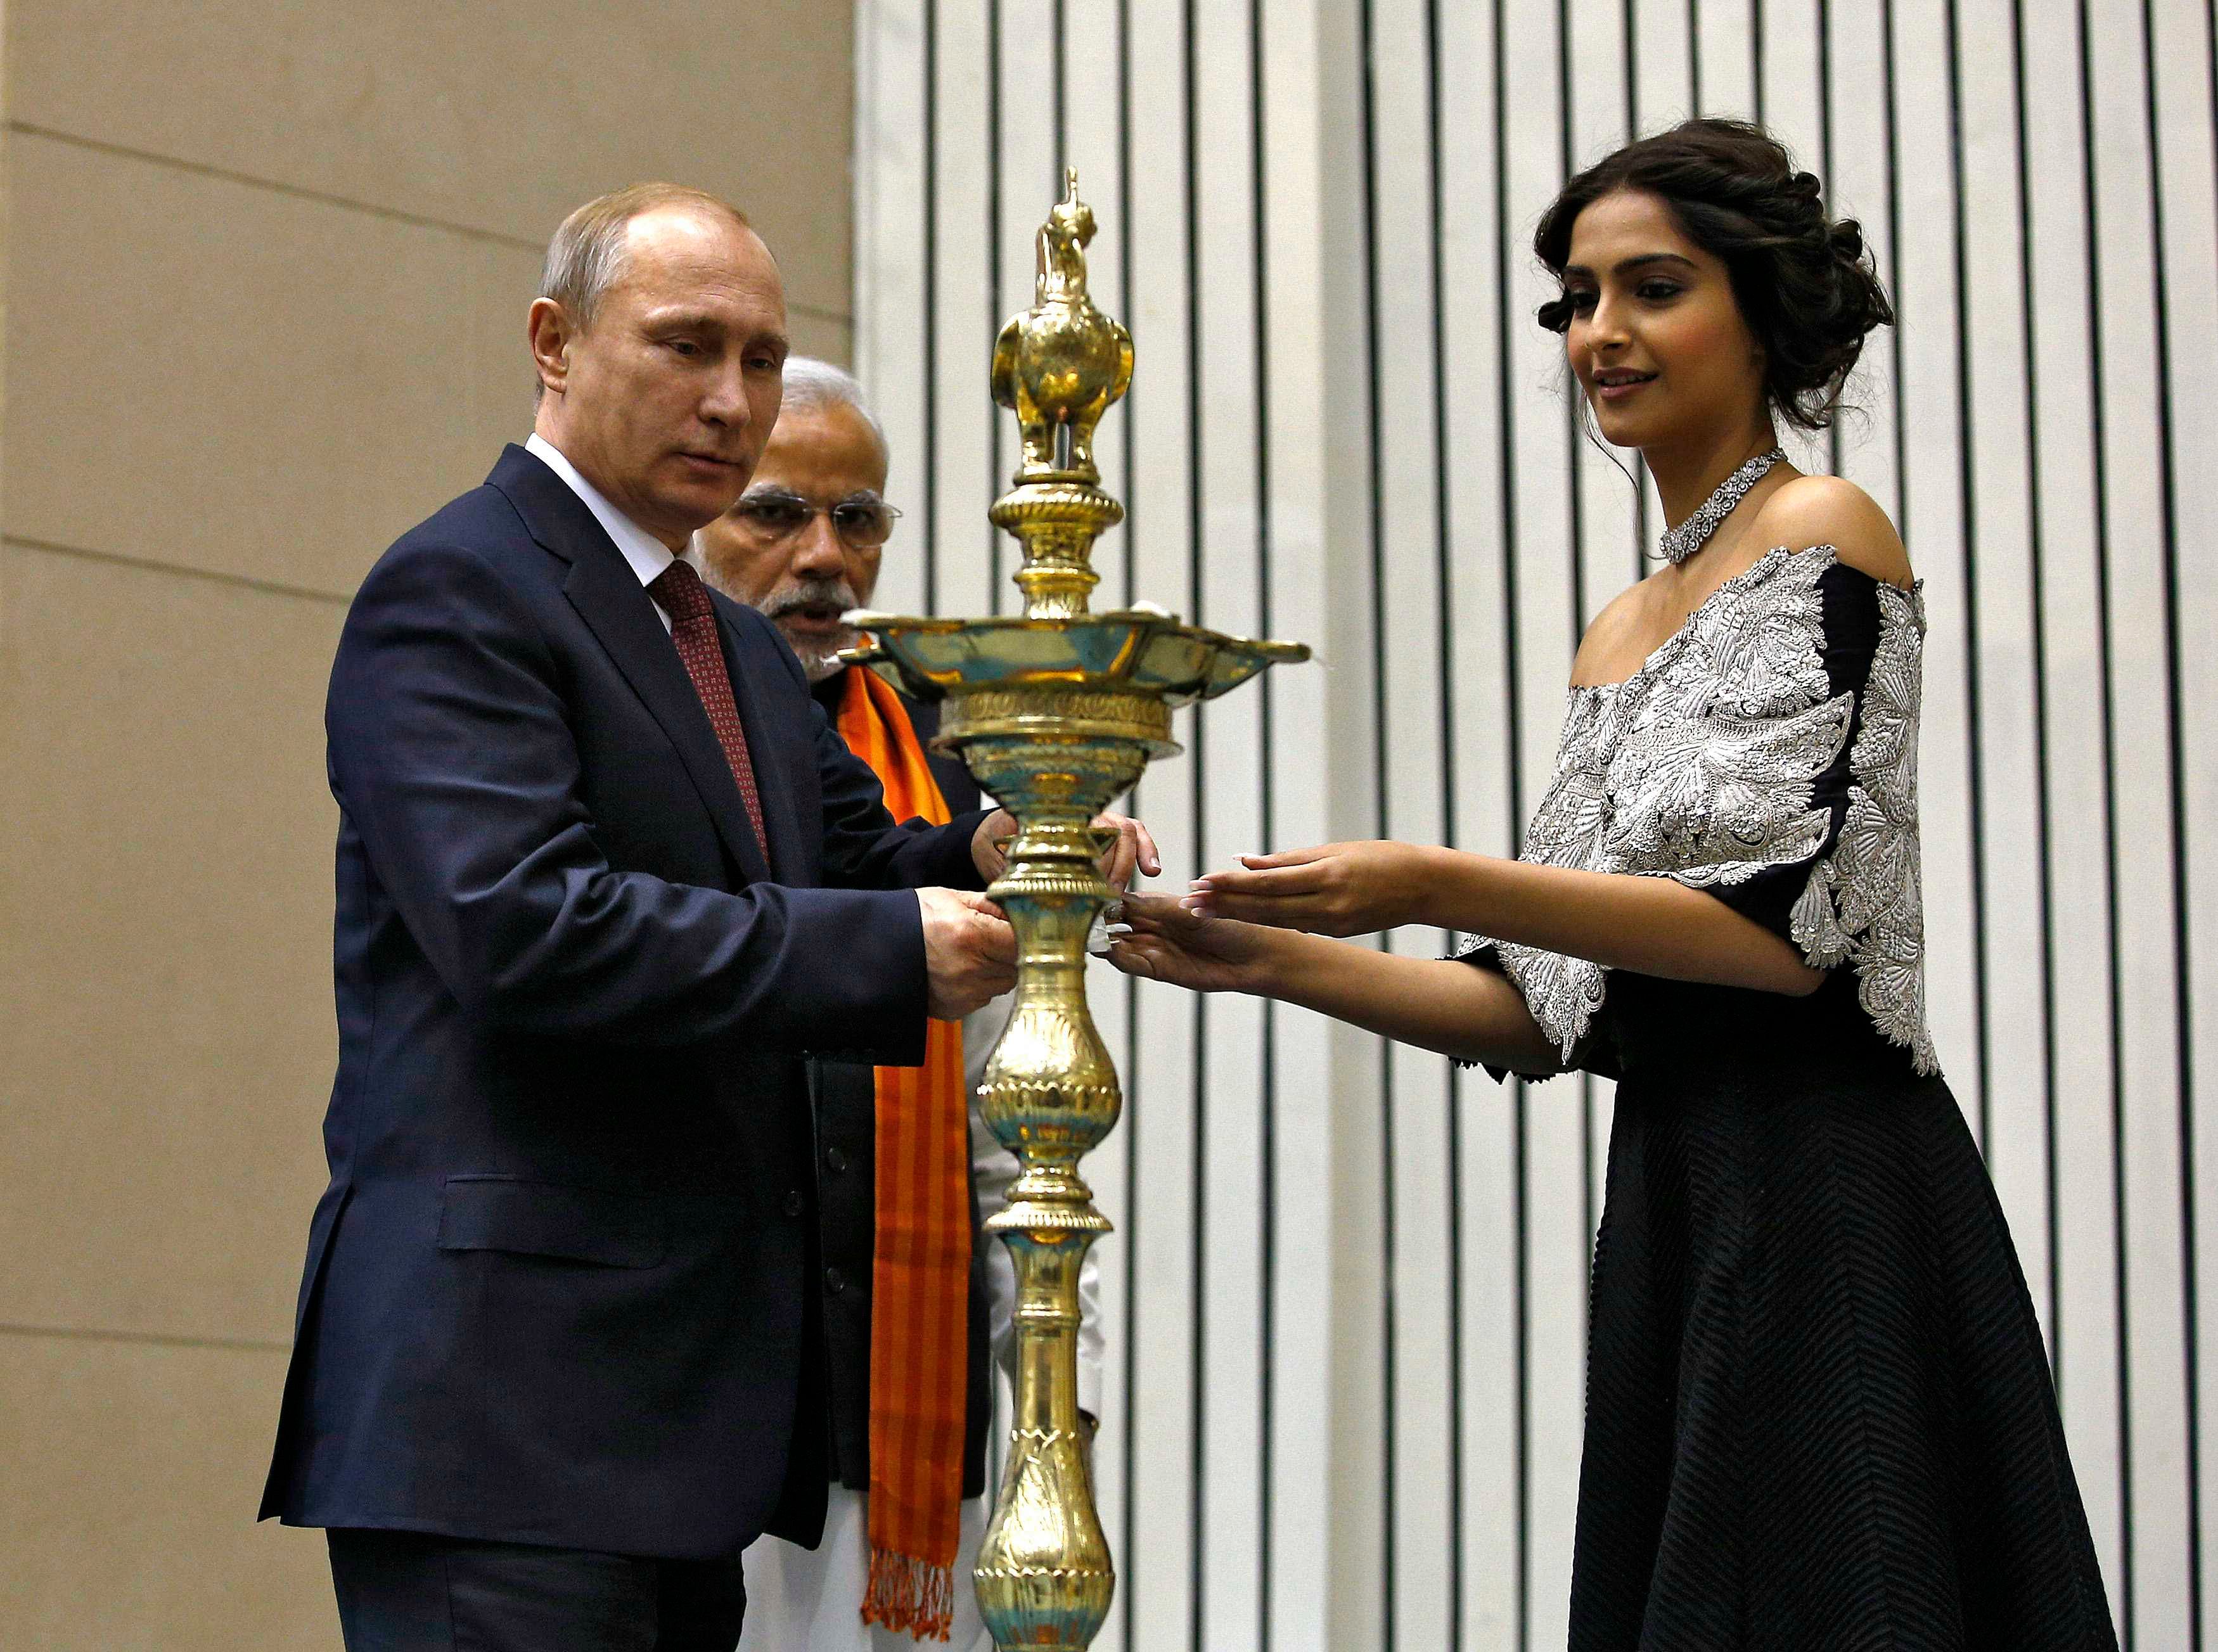 Bollywood actress Sonam Kapoor (R) helps Russian President Vladimir Putin (L) to light a traditional Indian oil lamp as India's Prime Minister Narendra Modiwatches during the inauguration of World Diamond Conference in New Delhi December 11, 2014. Photo: Reuters